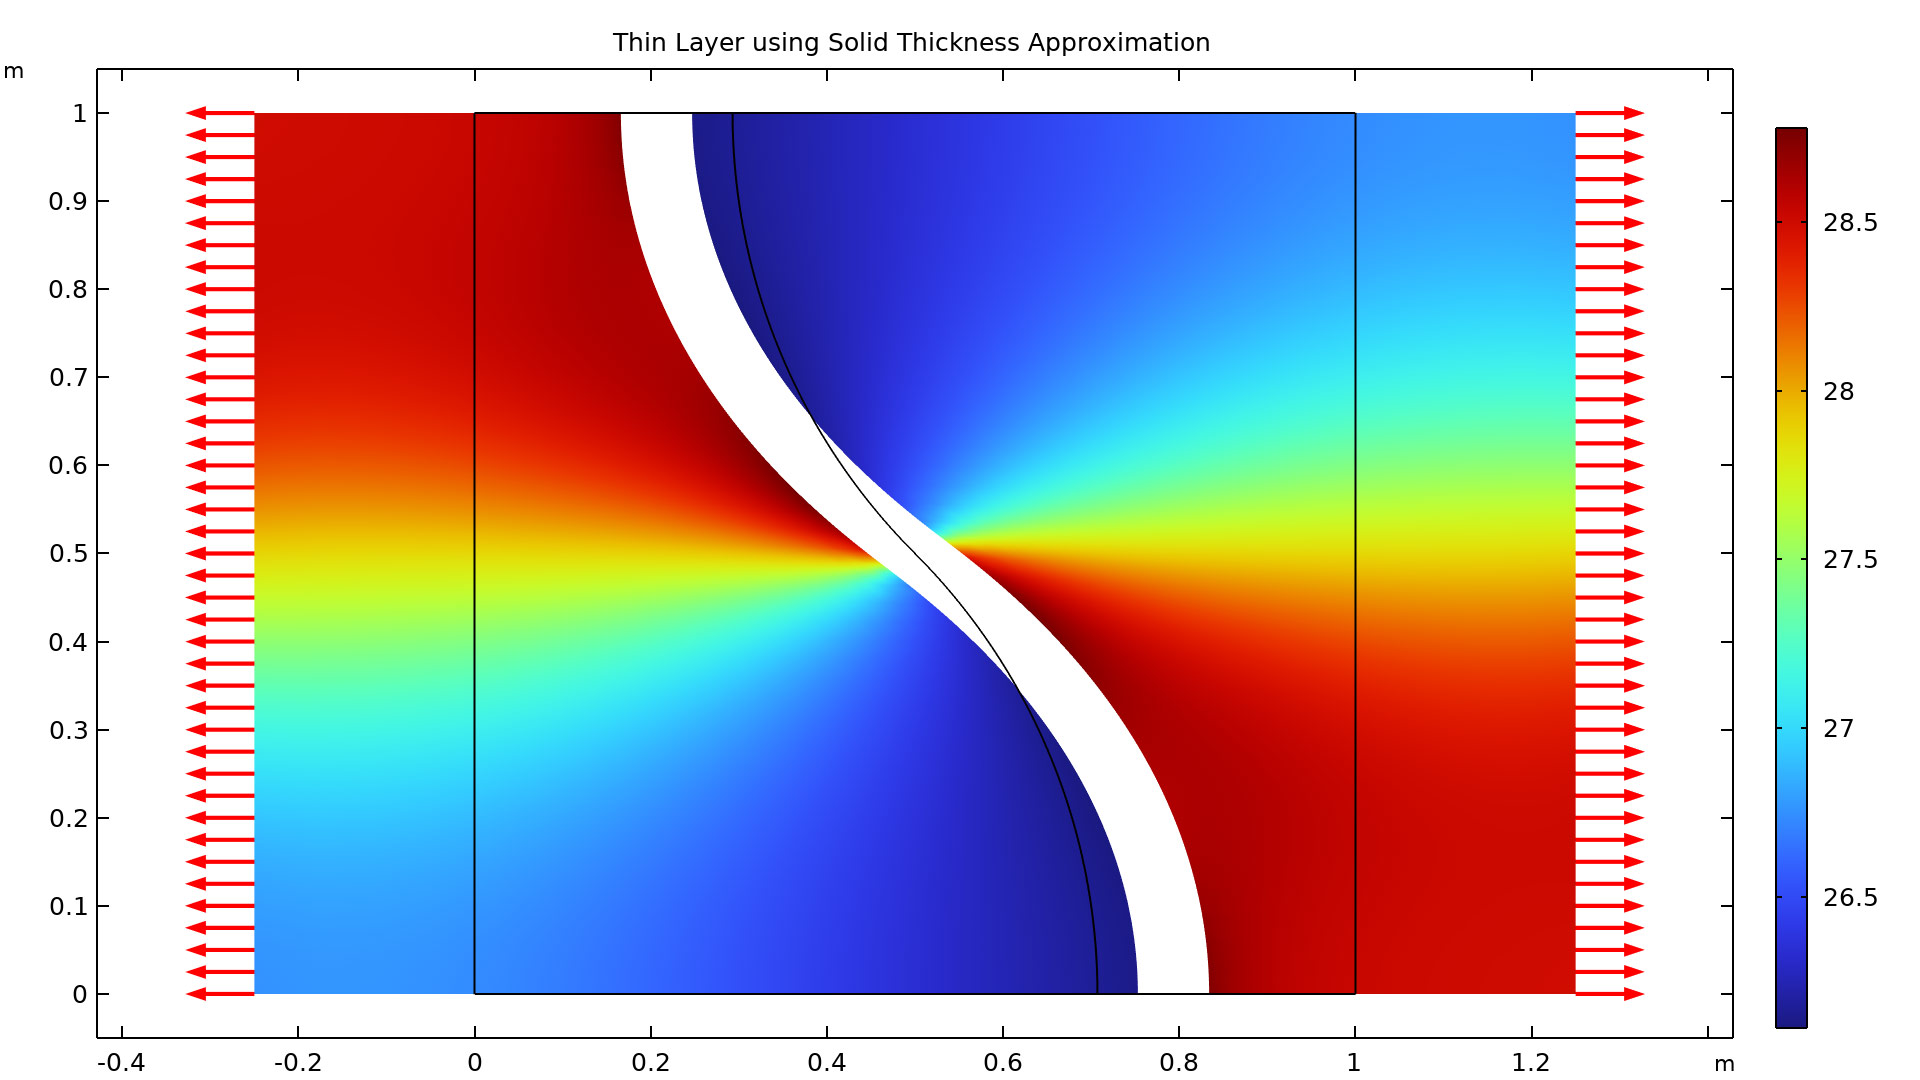 A 2D thin layer model showing the displacement and stress in the Rainbow color table.